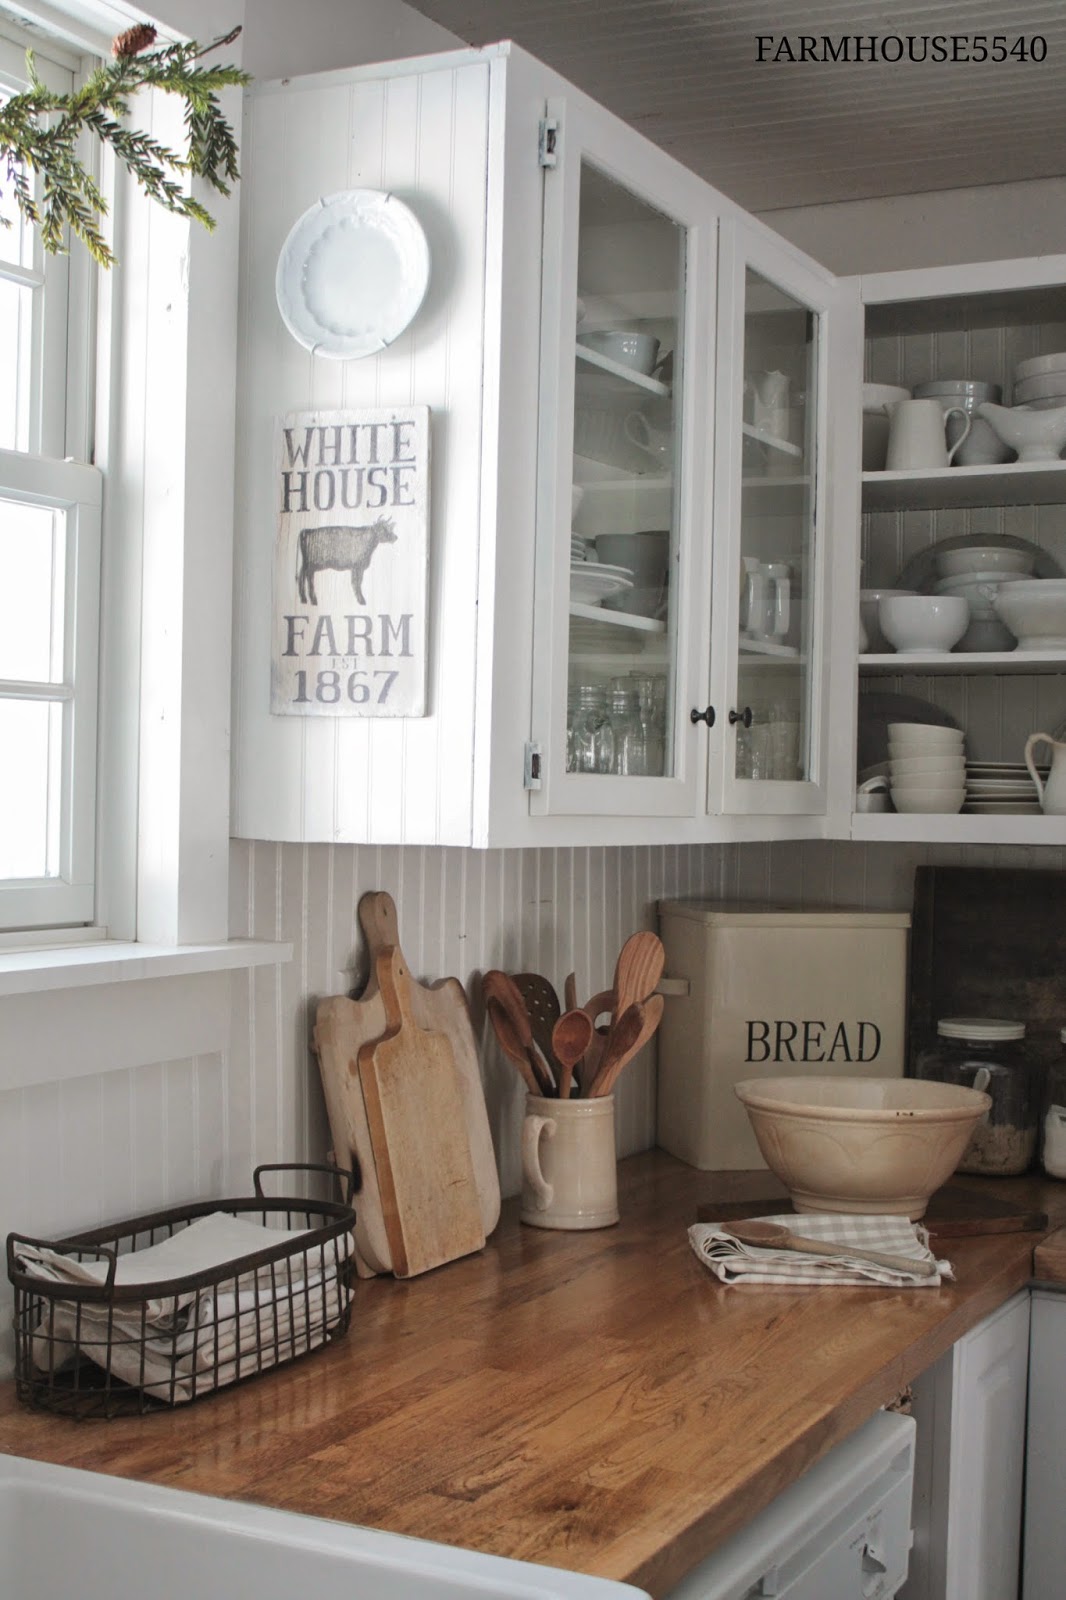 7 Ideas for a Farmhouse Inspired Kitchen {on a BUDGET}